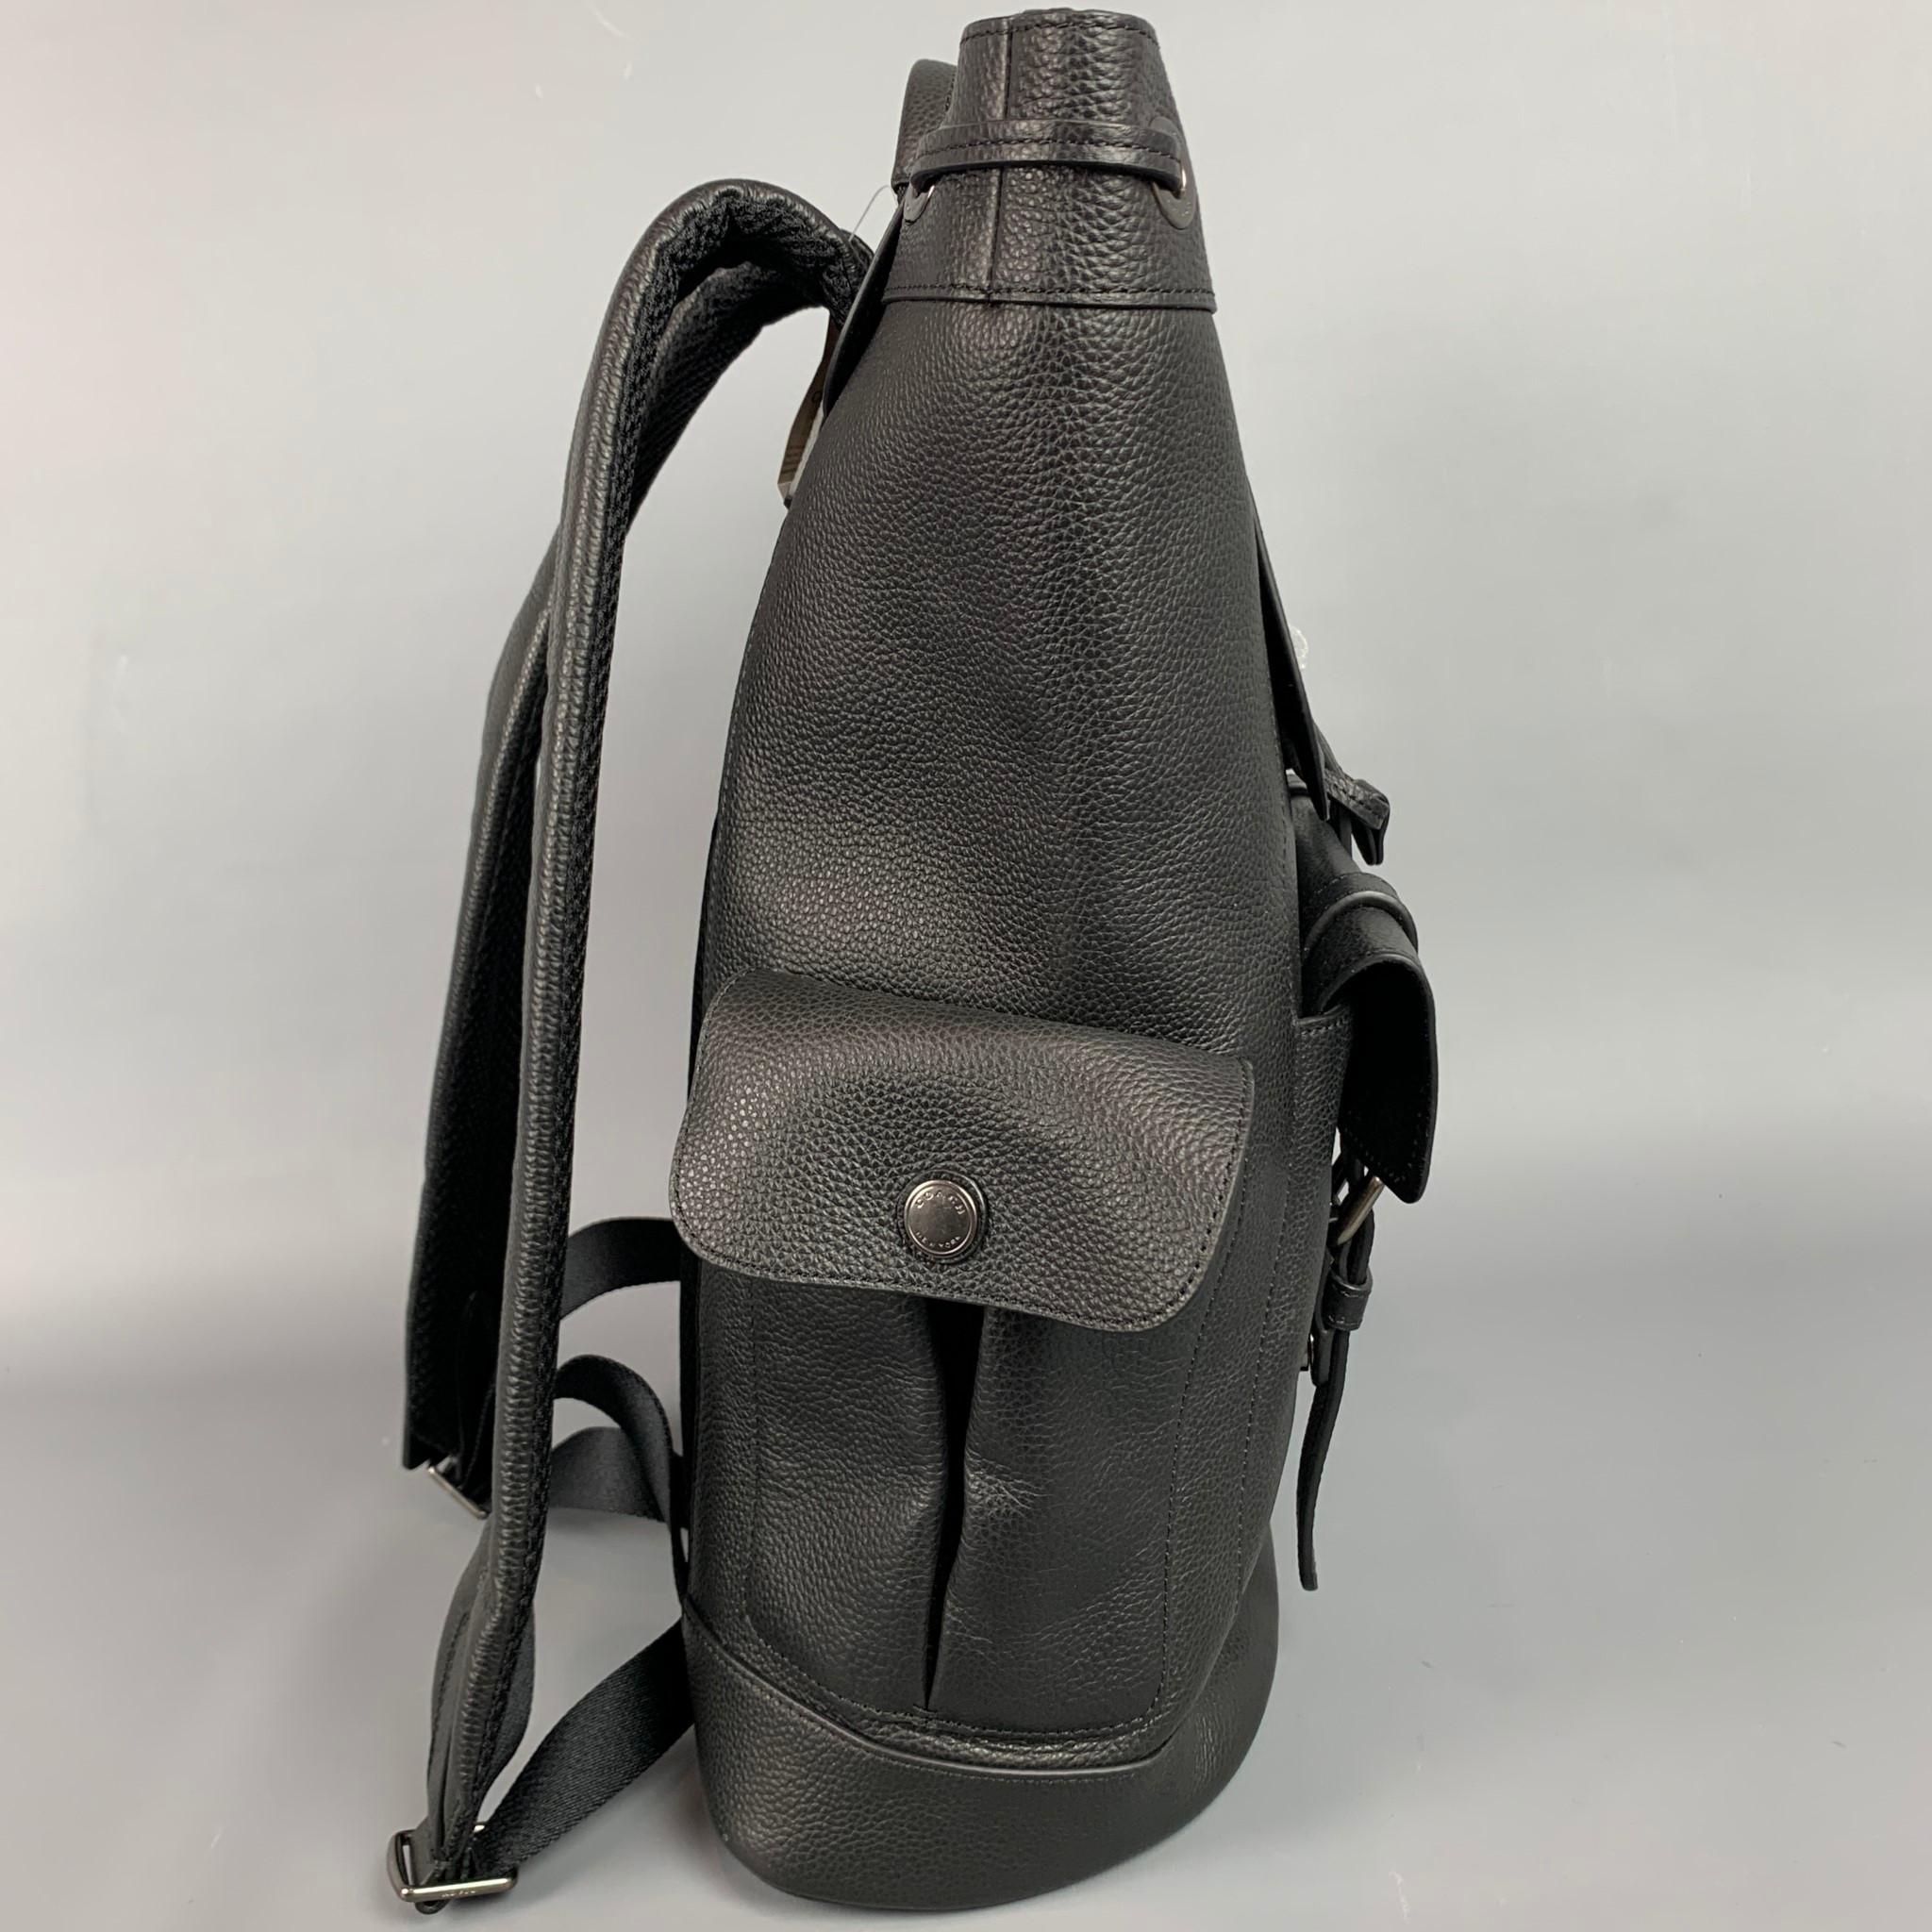 COACH backpack comes in a black pebble grain leather featuring adjustable shoulder straps, inside zipper pocket, outside flap pockets, drawstring, top handle, and buckle closures.

New With Tags.
Marked: F36811
Original Retail Price: